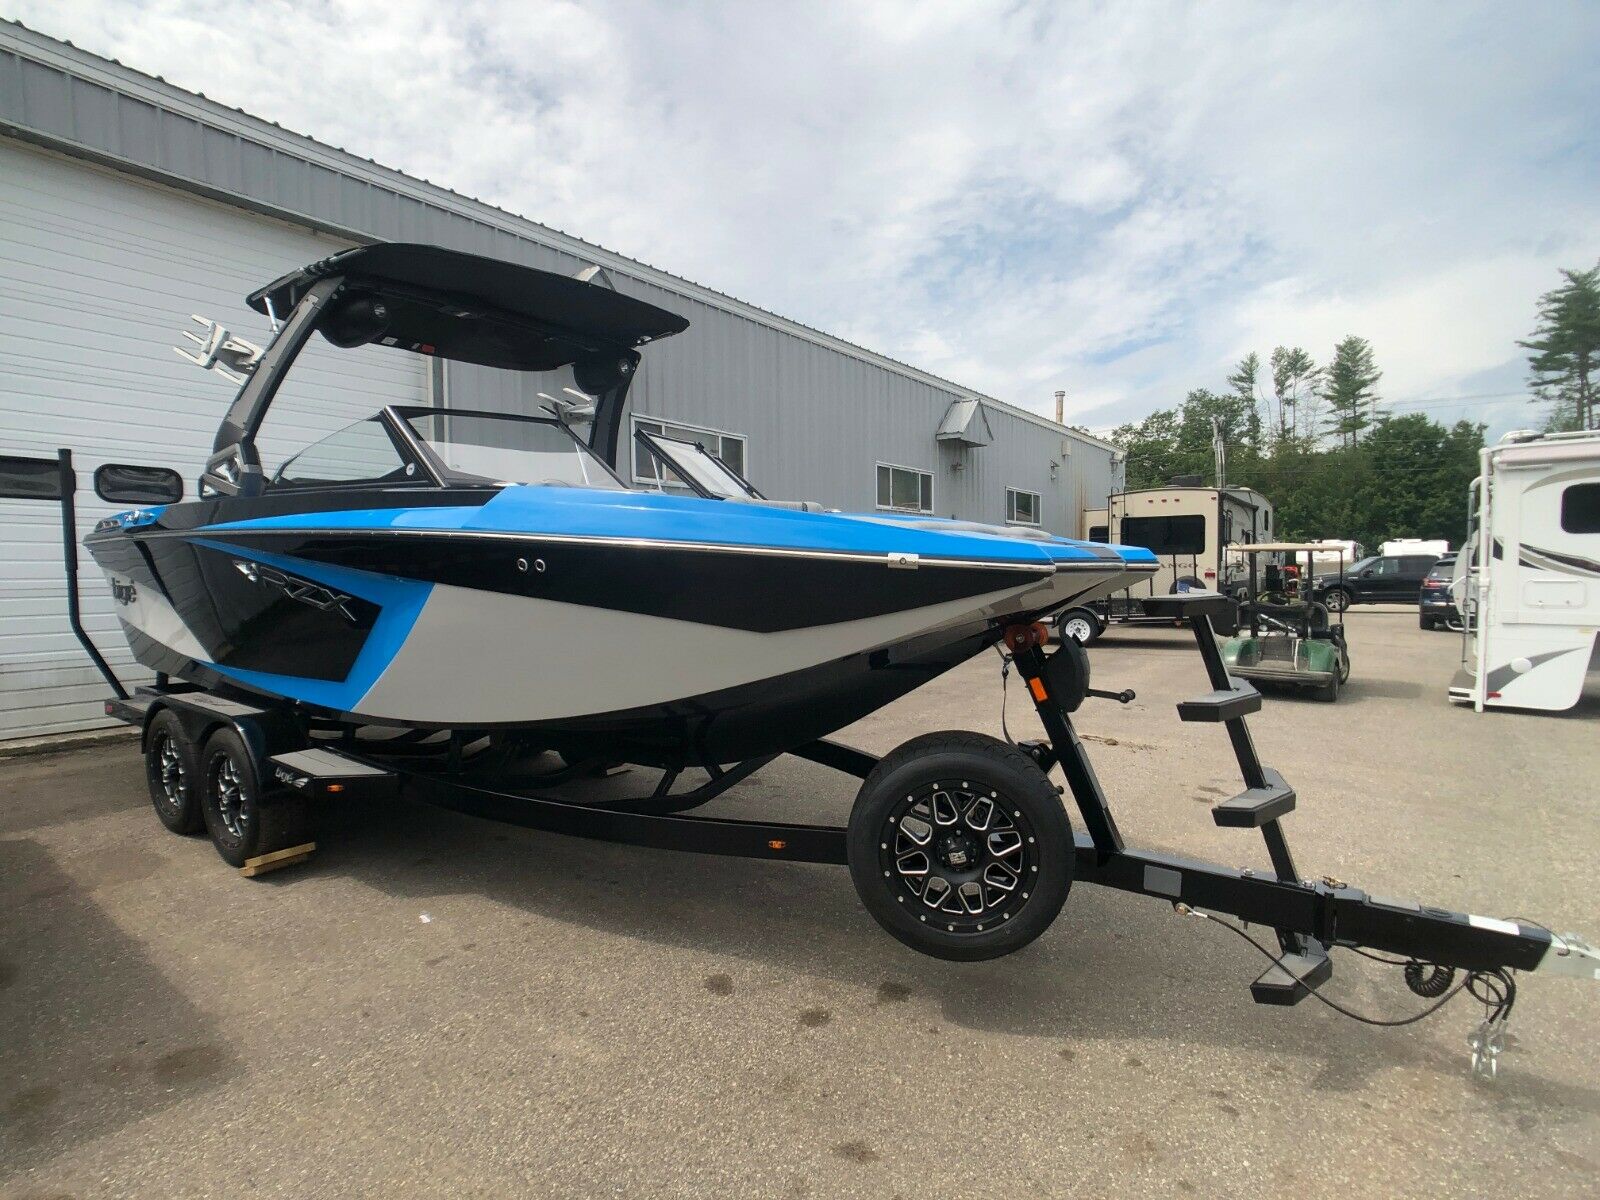 Tige 2020 for sale for $119,500 - Boats-from-USA.com